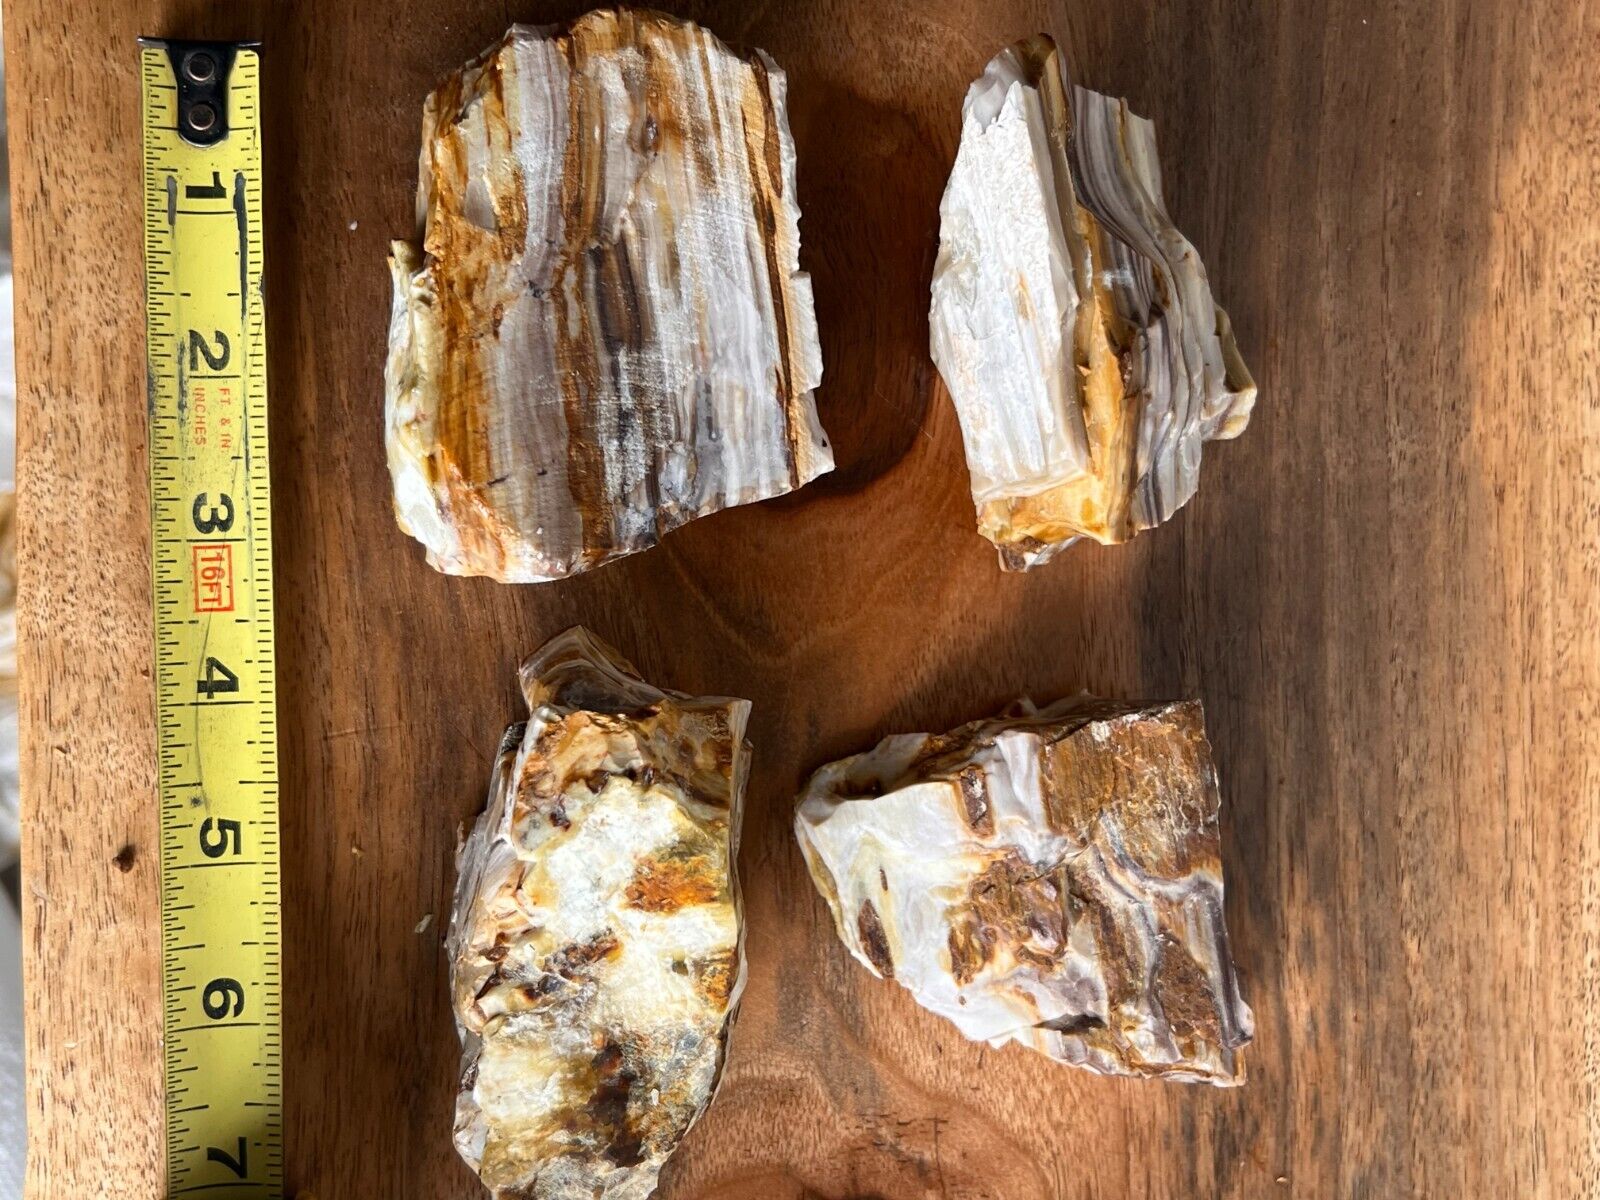 petrified wood opalized agatized 4 piece raw decor collection red white 1lb 10oz